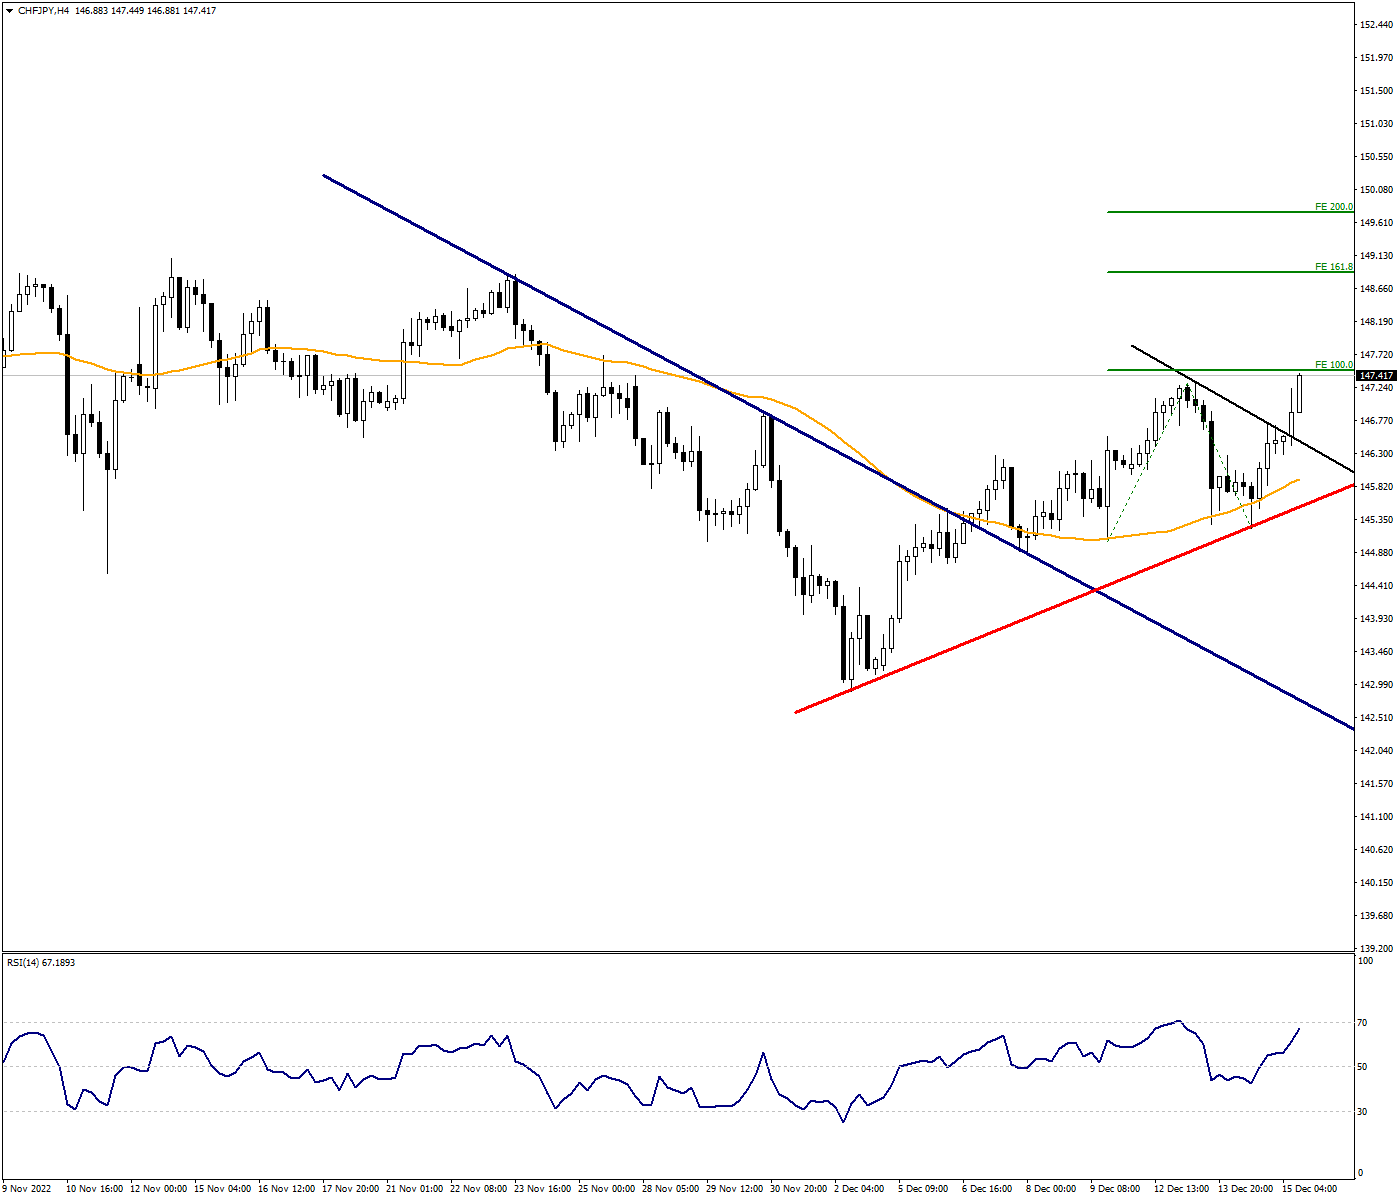 CHFJPY Receives Support From BoJ-SNB Policy Divergence